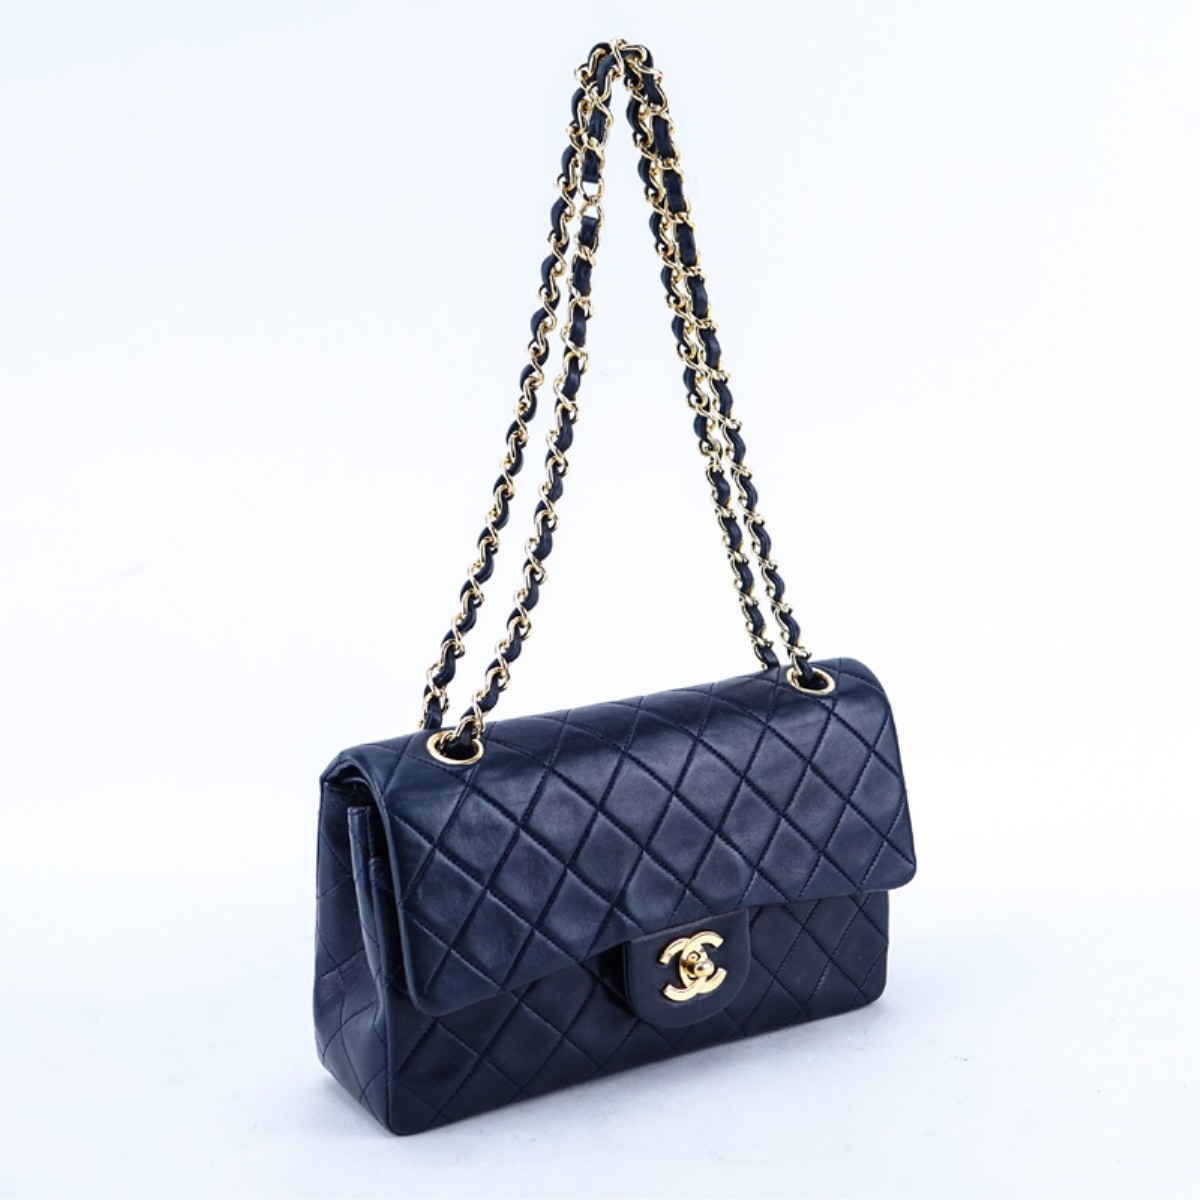 Chanel Navy Blue Quilted Leather Classic Dbl Flap